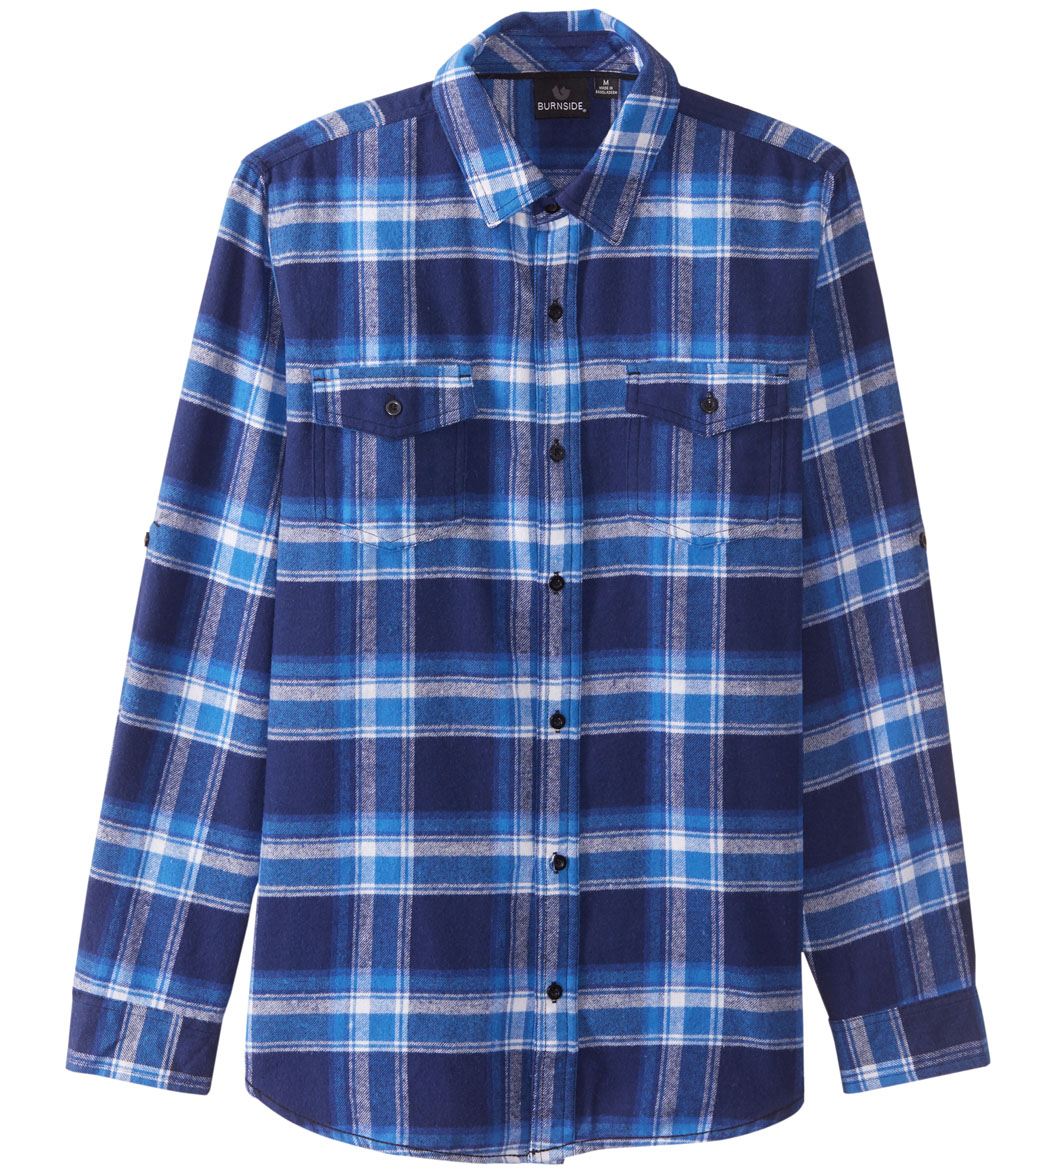 Men's Yarn Dyed Long Sleeve Flannel Shirt - Blue/White Small Cotton - Swimoutlet.com